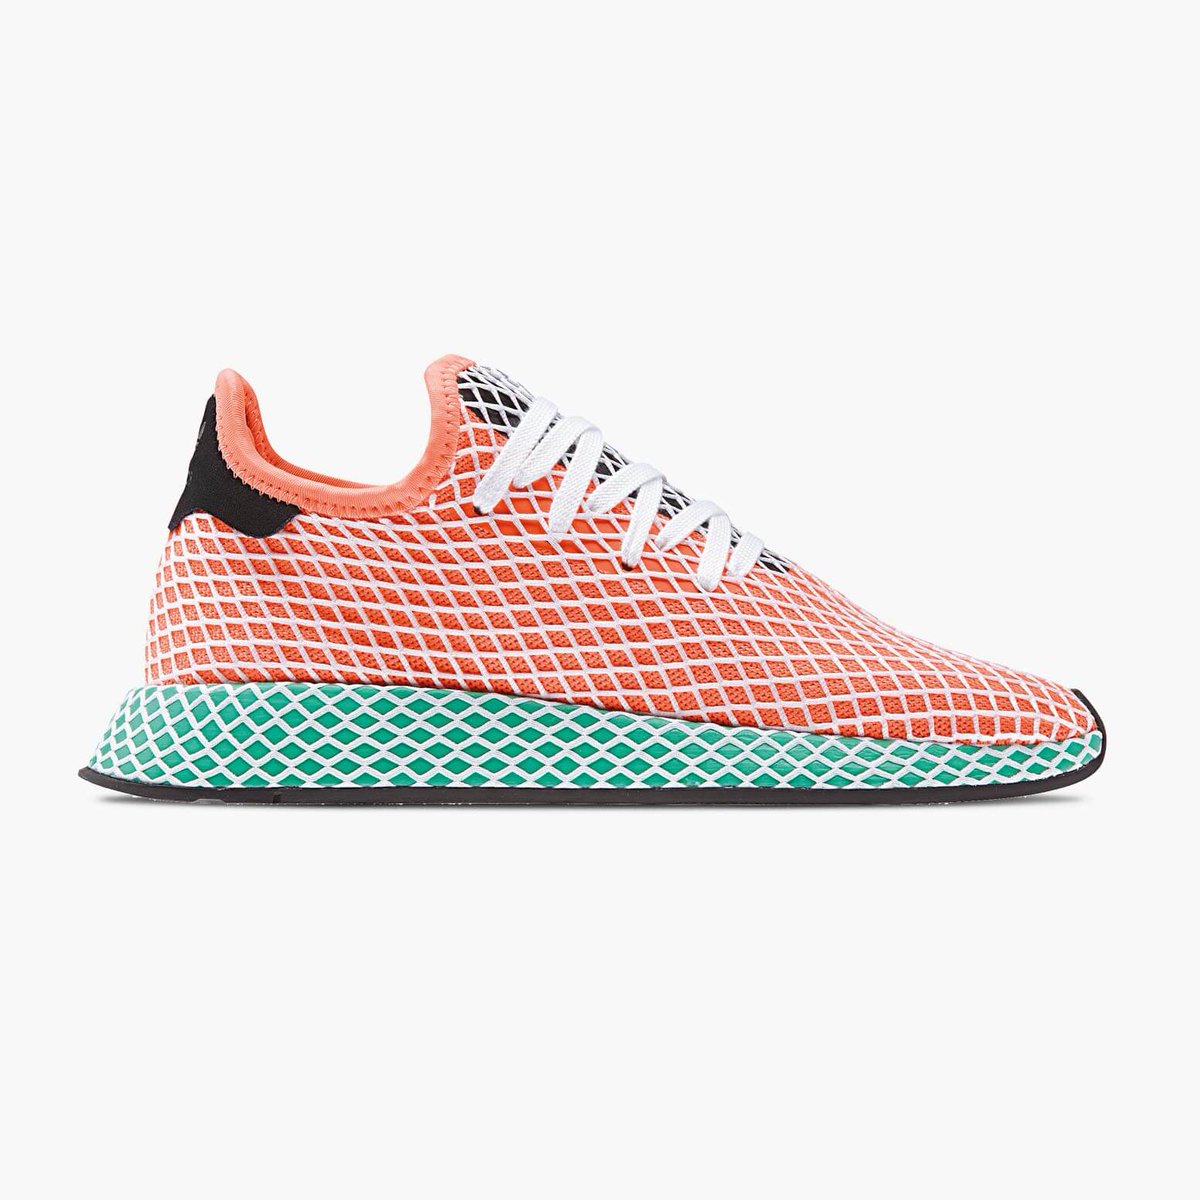 on Twitter: "Check the latest #Deerupt? Check https://t.co/KW2pFOJghc https://t.co/s9l8hU0zDI" / Twitter